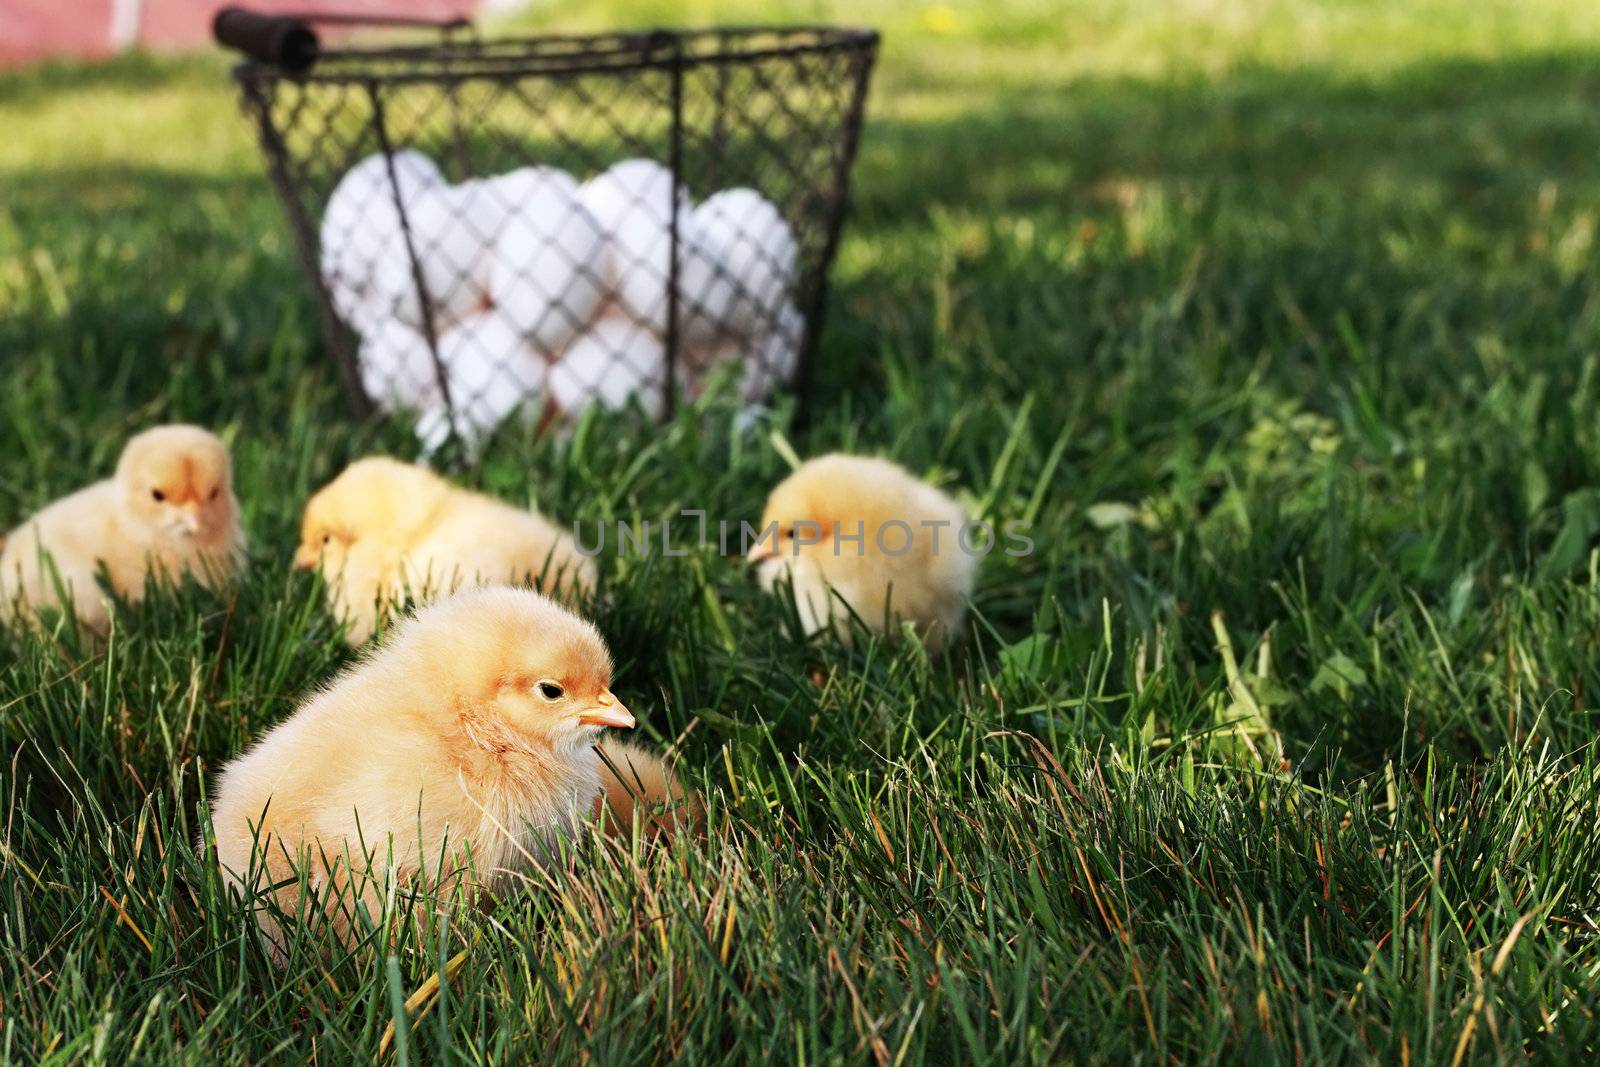 Little free range Buff Orpington chicks outdoors by a basket filled with fresh organic eggs. Extreme shallow depth of field with selective focus on chick in foreground. 